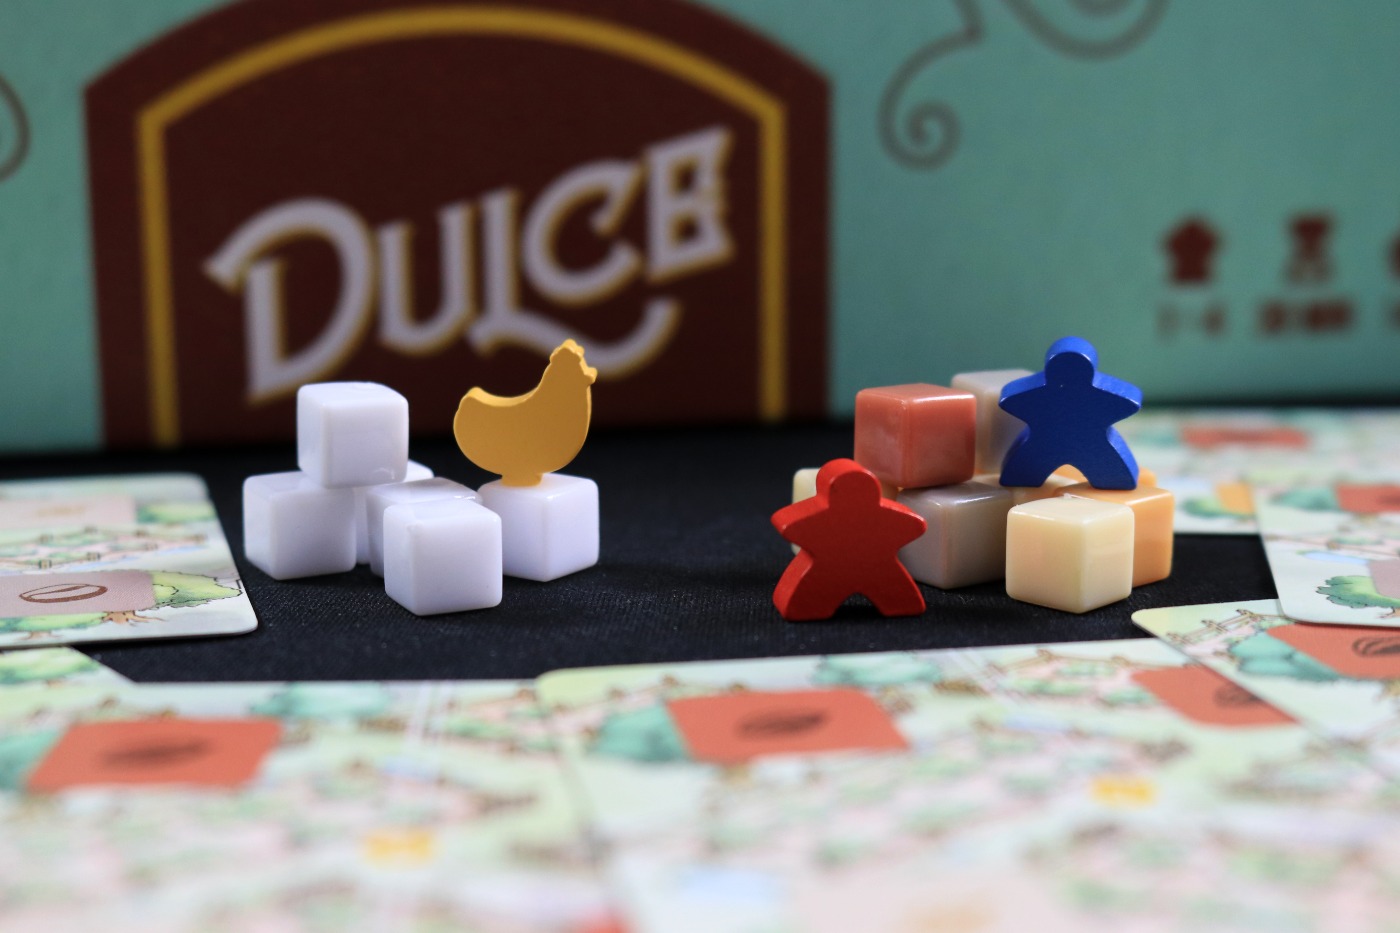 Dulce components